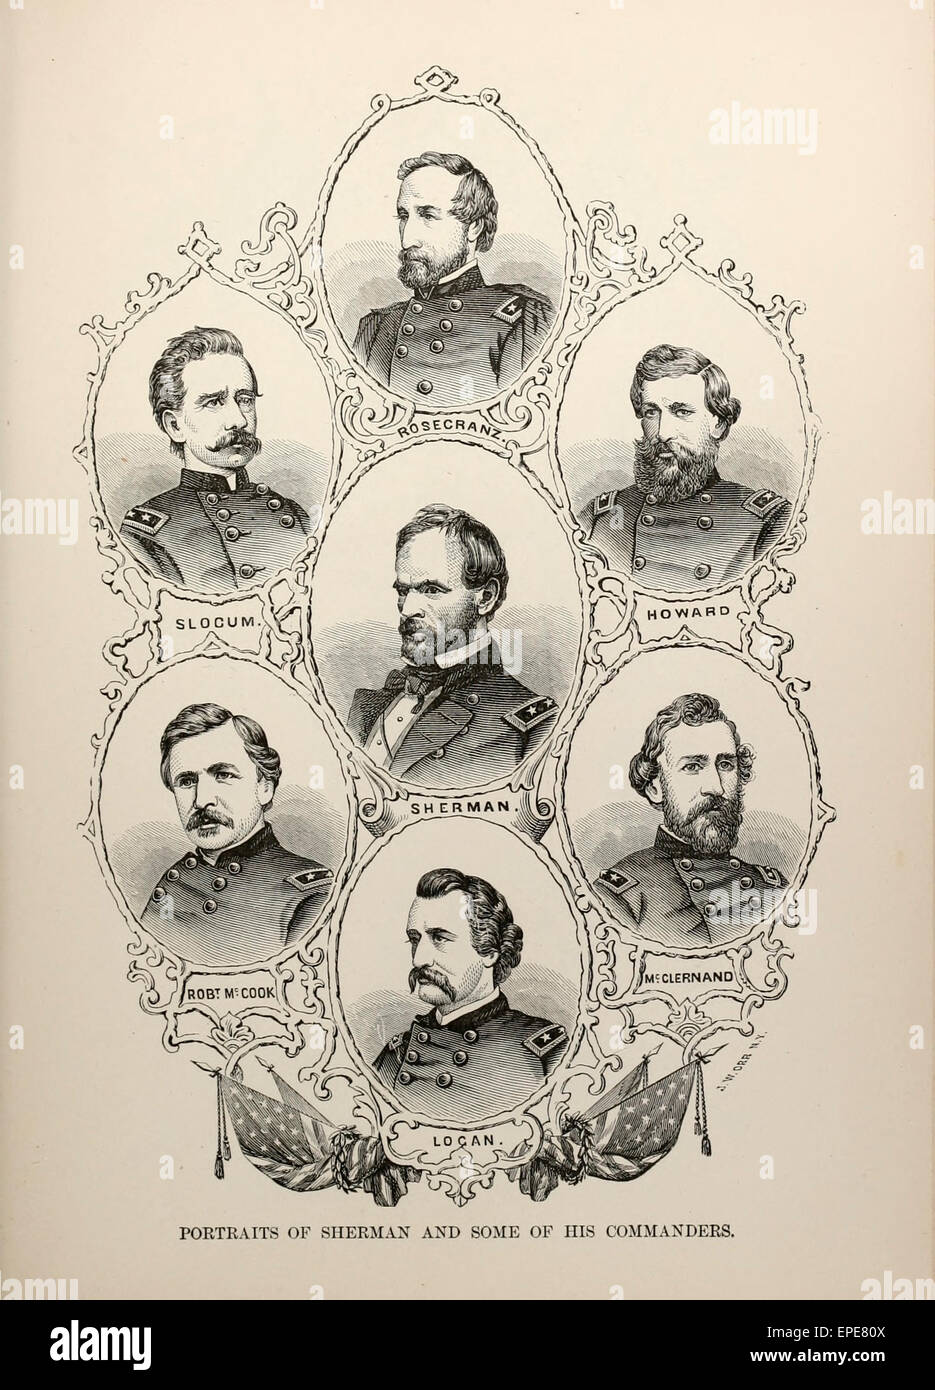 Portraits of General William T. Sherman and some of his commanders during the USA Civil War - Sherman, Logan, Slocum, Howard, McClernand, Robert Cook Stock Photo